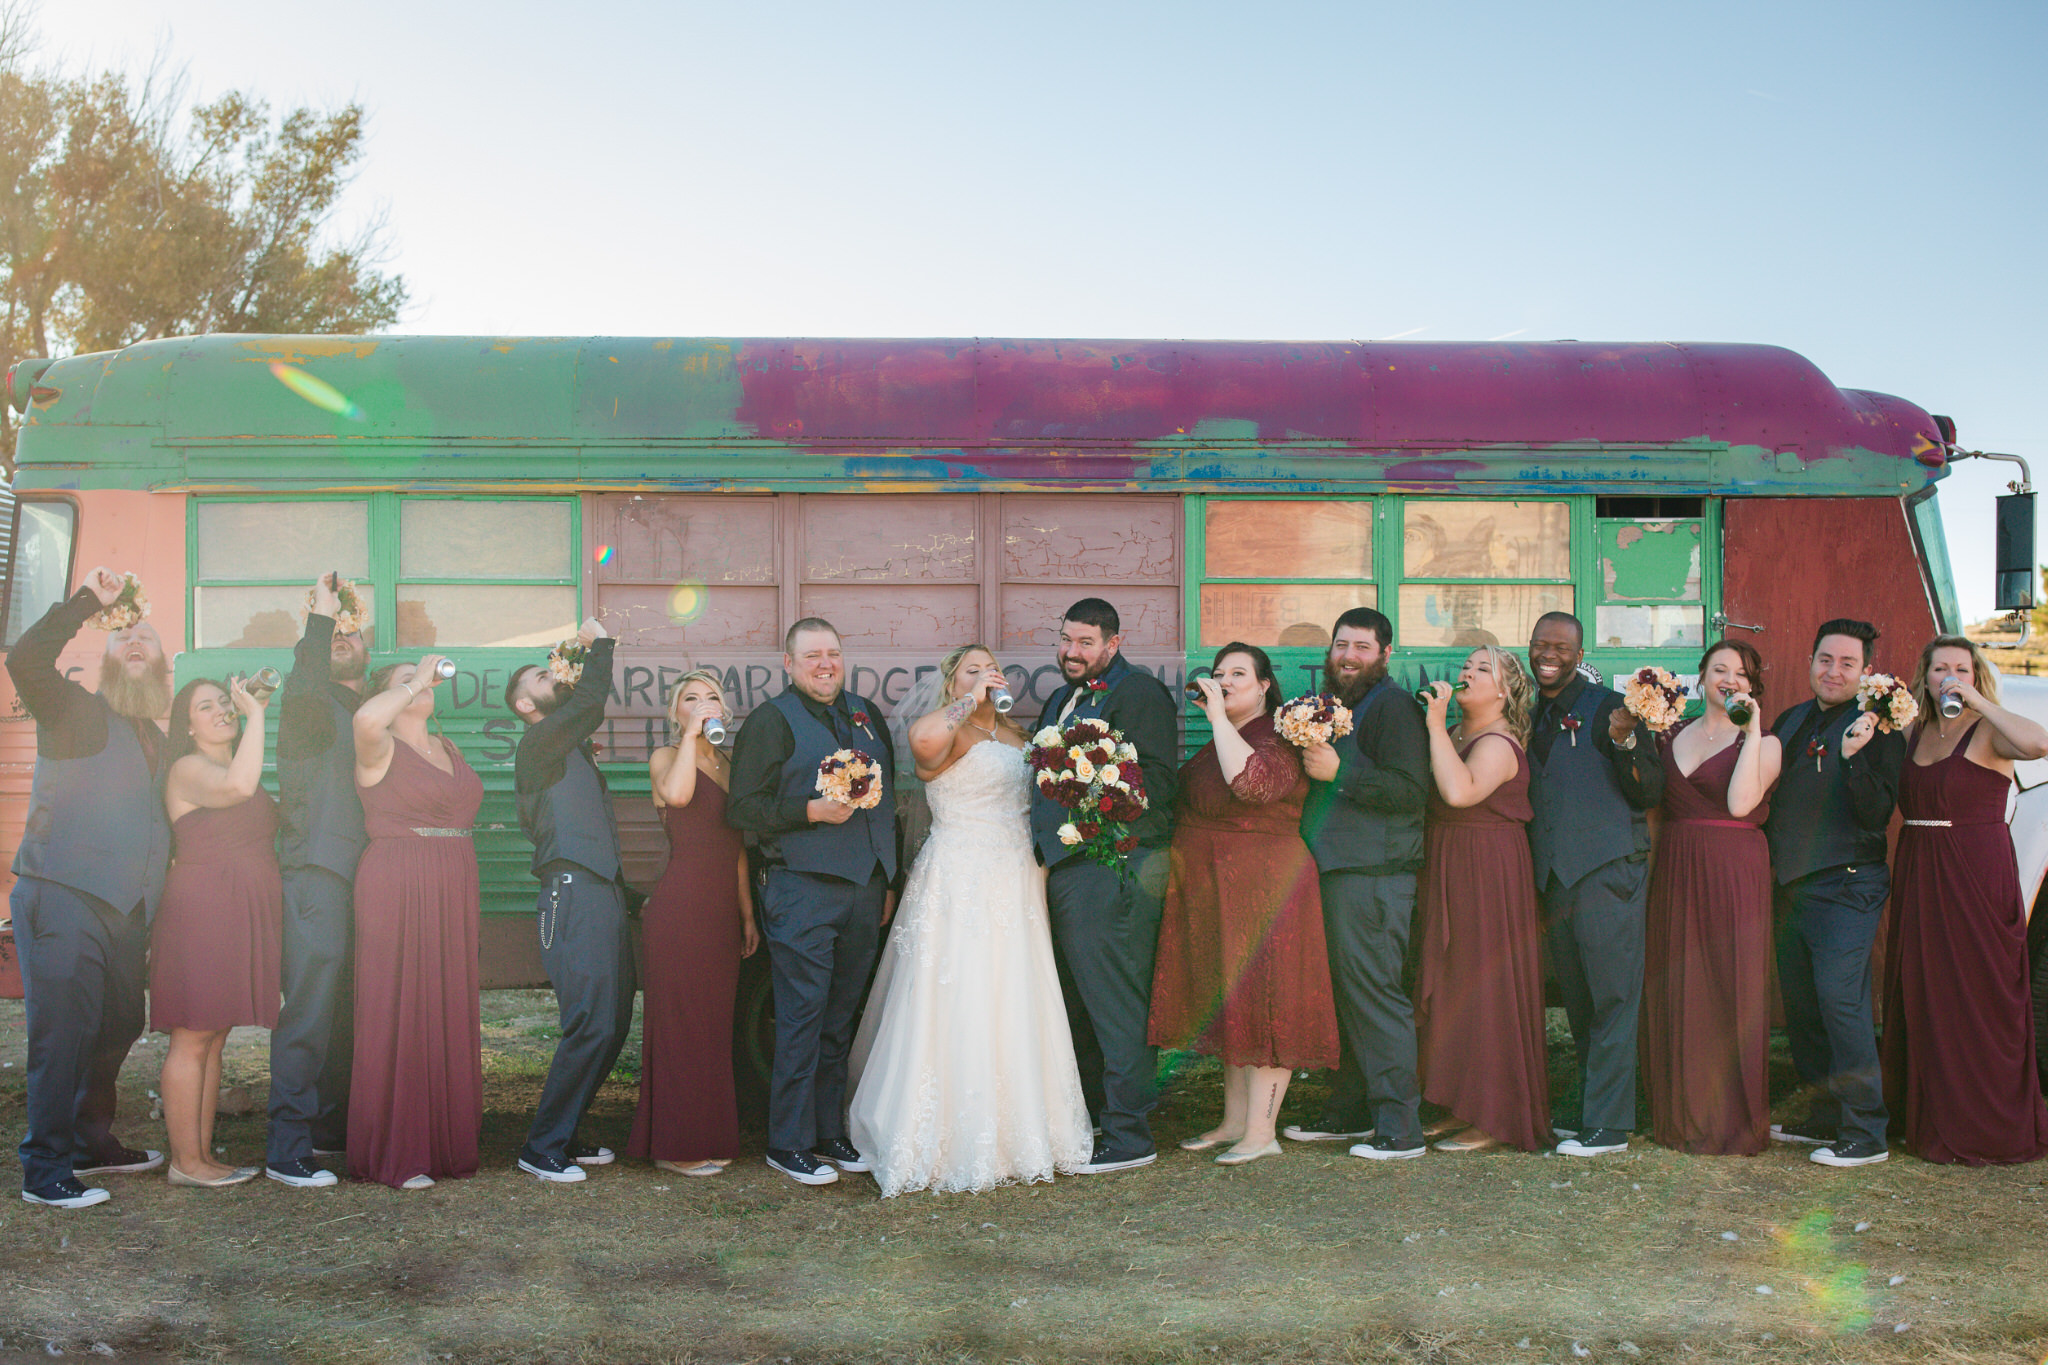 The bridal party having some drinks during their portraits. Briana and Kevin's Terry Bison Ranch Wedding by Wyoming Wedding Photographer Jennifer Garza, Wyoming Wedding, Wyoming Wedding Photographer, Wyoming Engagement Photographer, Wyoming Bride, Couples Goals, Wyoming Wedding, Wedding Photographer, Wyoming Photographer, Wyoming Wedding Photography, Wedding Inspiration, Destination Wedding Photographer, Fall Wedding, Ranch Wedding, Rustic Wedding Inspiration, Wedding Dress Inspo